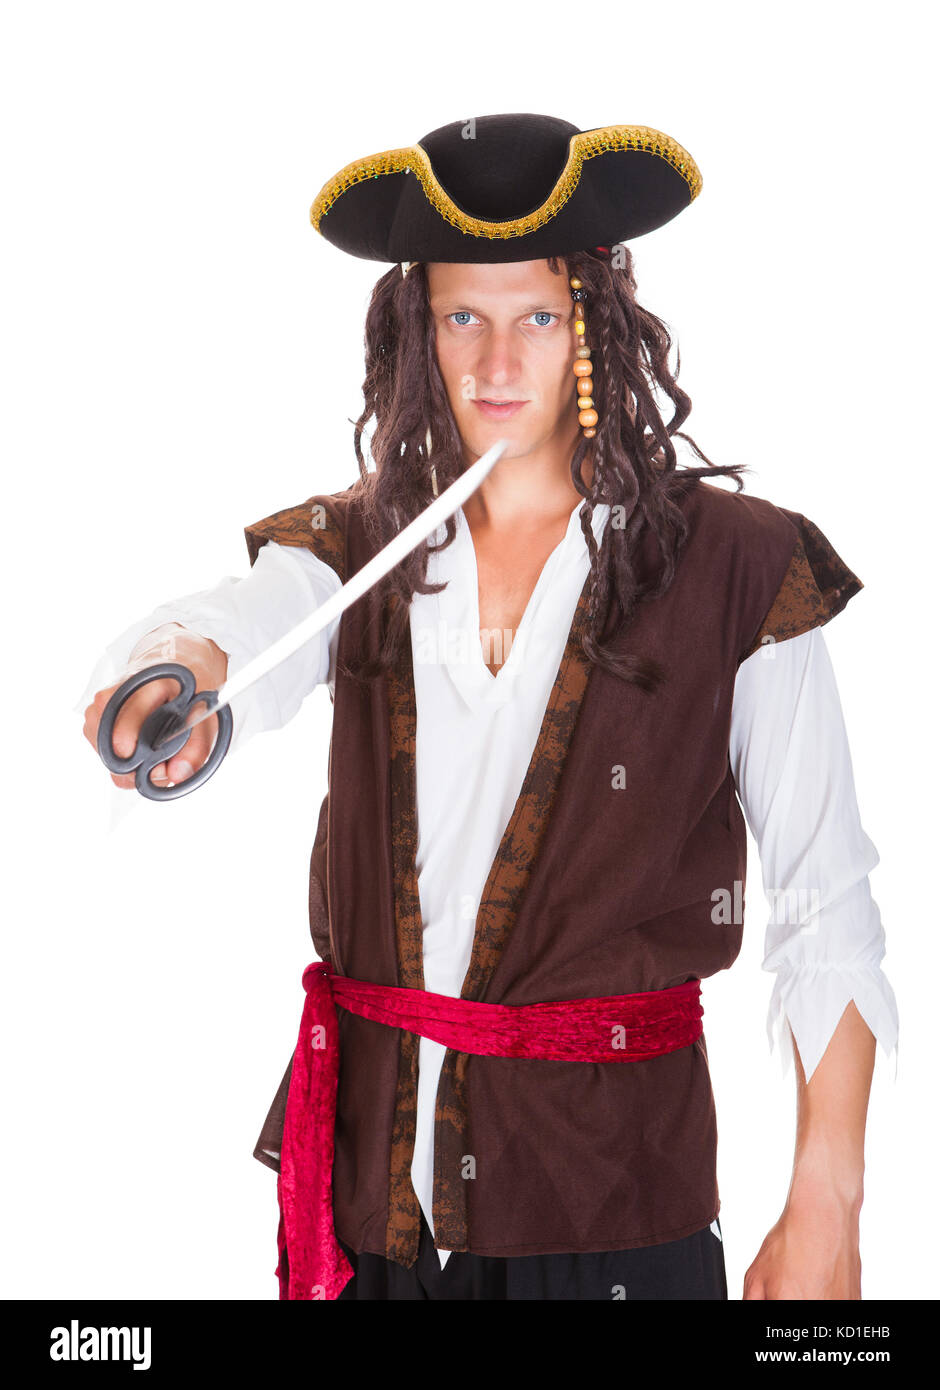 Portrait Of A Young Pirate Holding Sword On White Background Stock ...